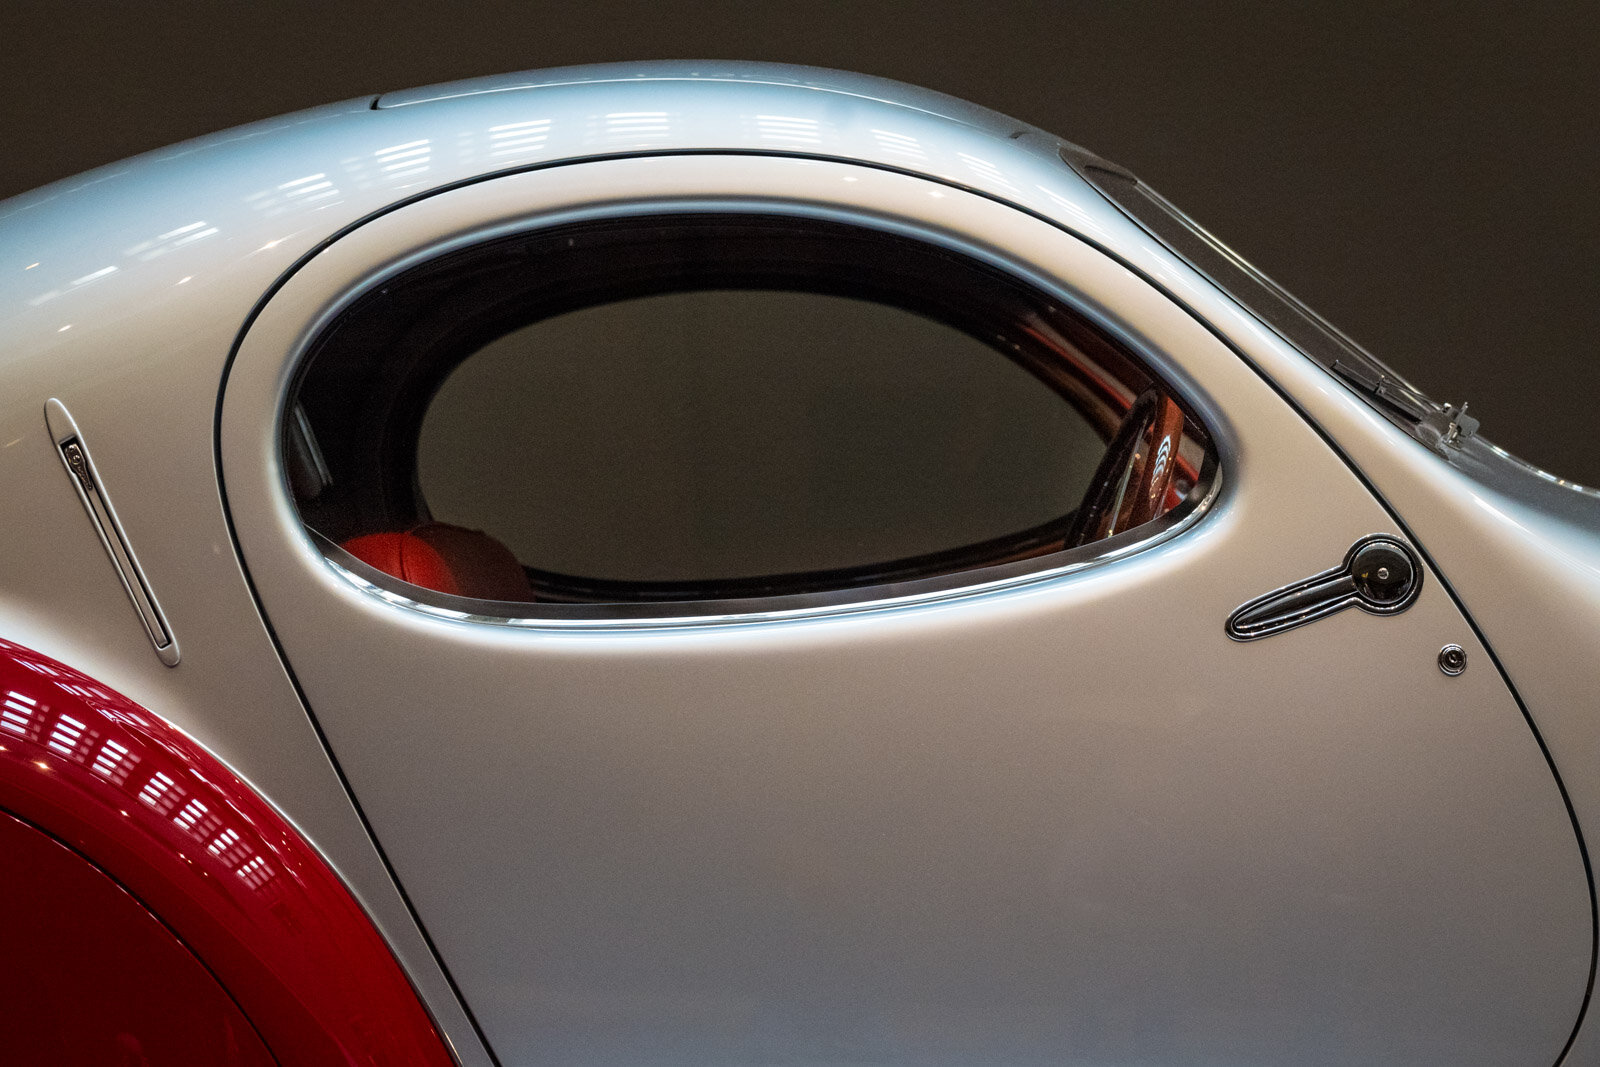 1938 Talbot-Lago T-150C-SS Teardrop Coupe, Rolling Sculpture